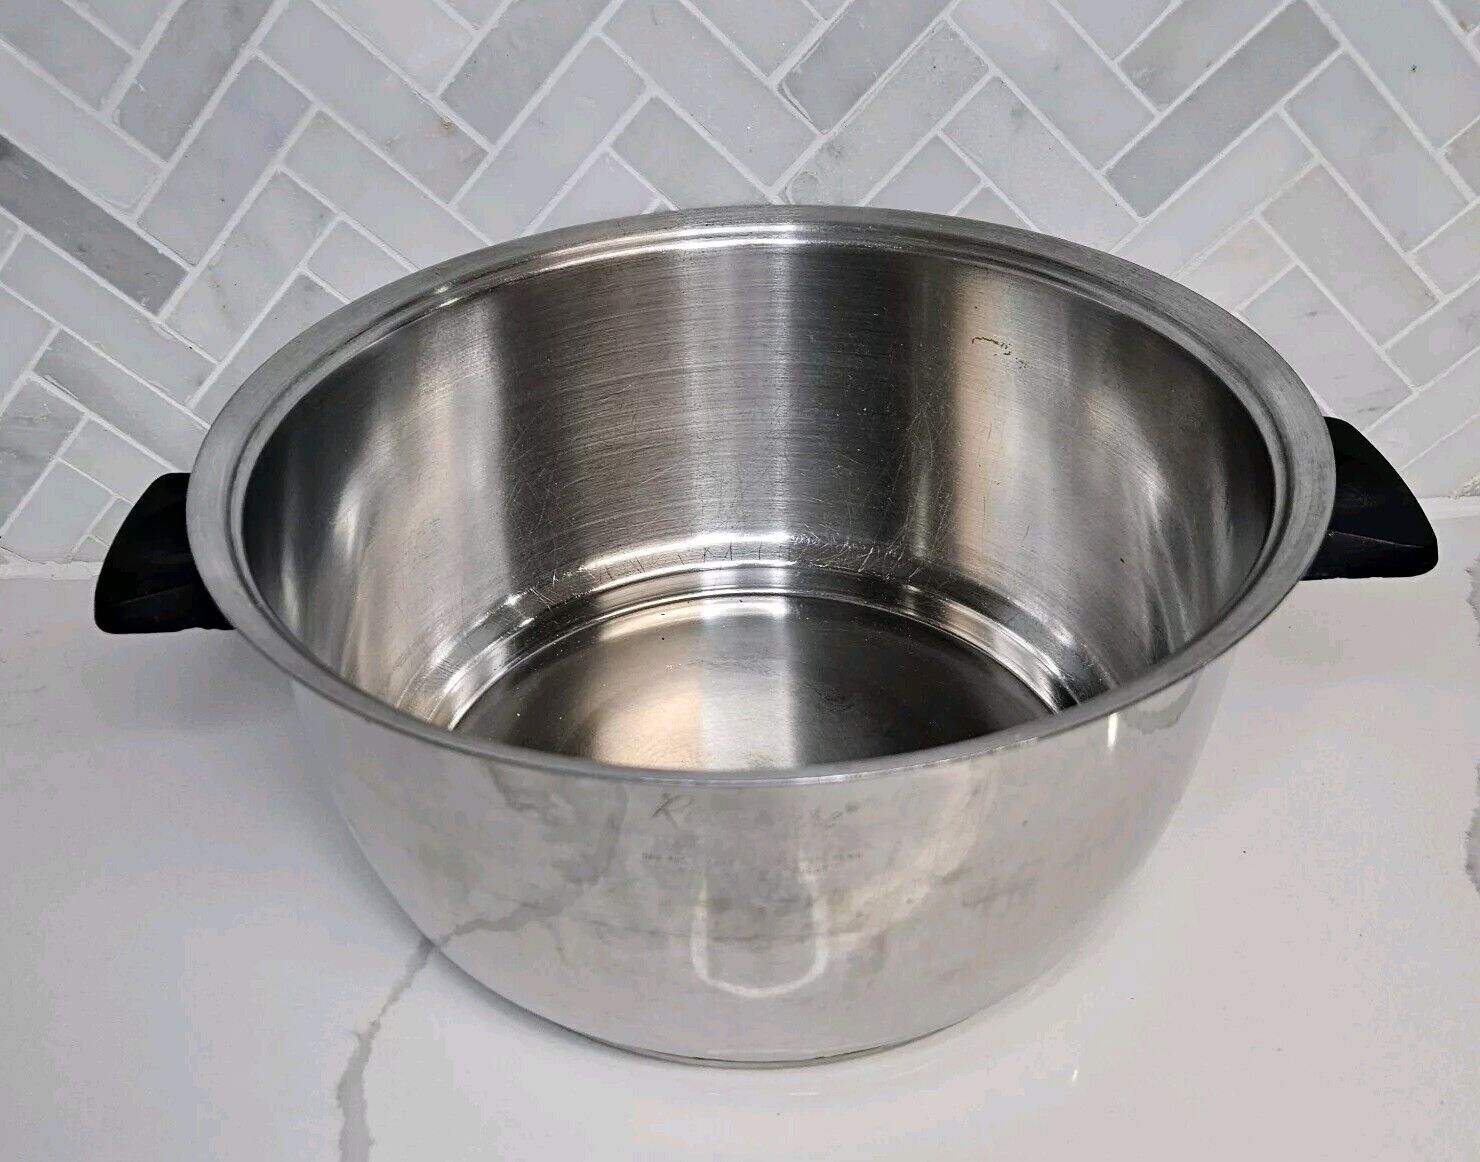 Rena Ware 6 Qt. Stock Pot 3 Ply 18-8 Stainless USA Vintage NO LID Cookware Crock